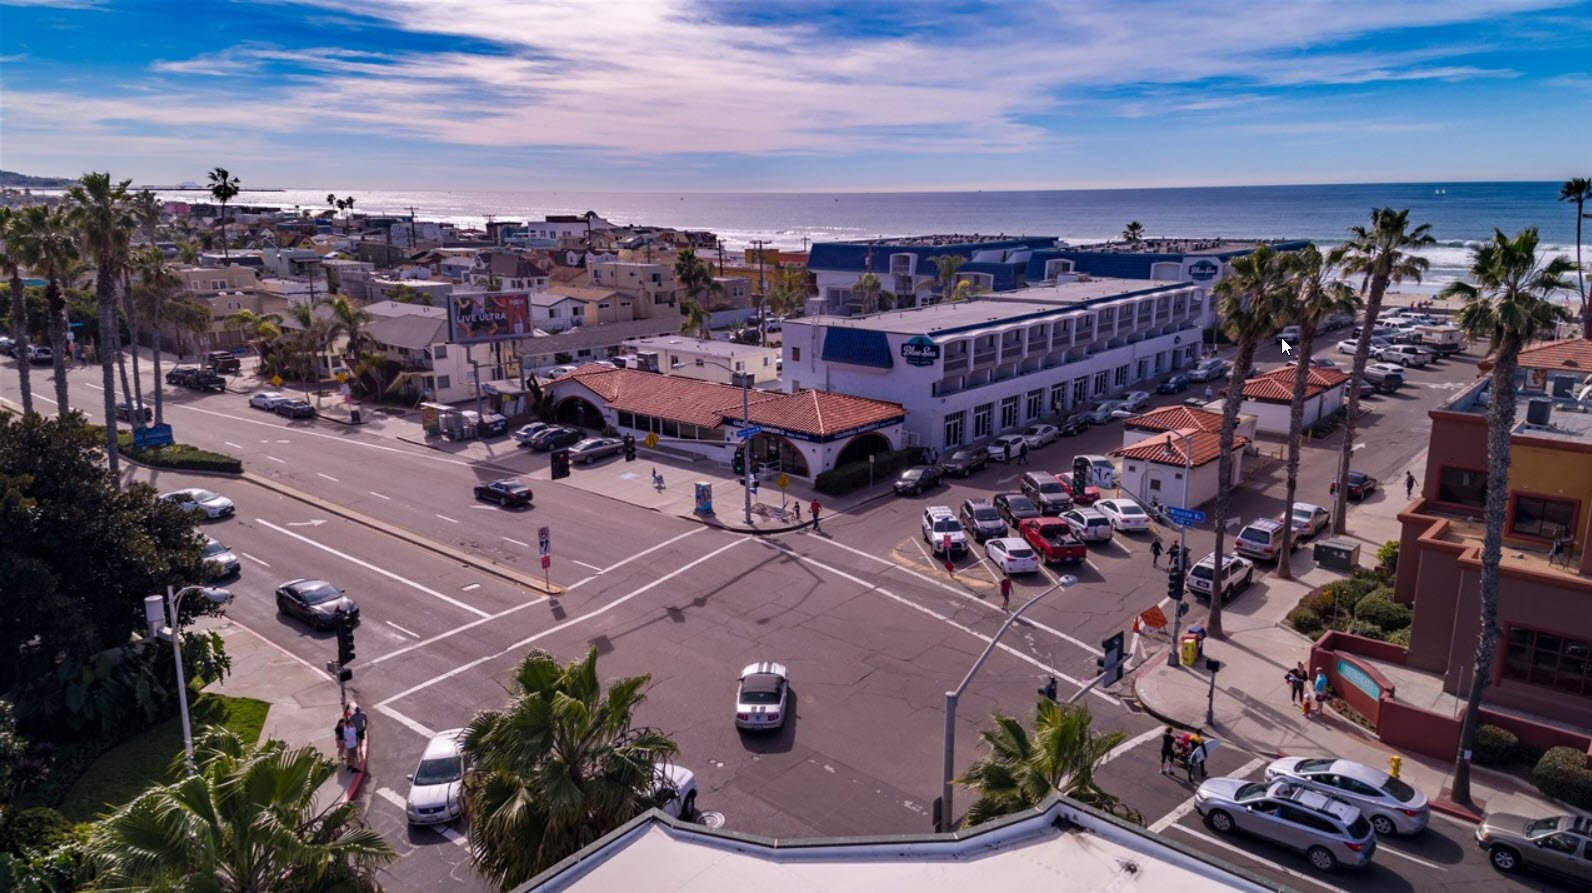 Bird's eye view of Mission Blvd and the beach